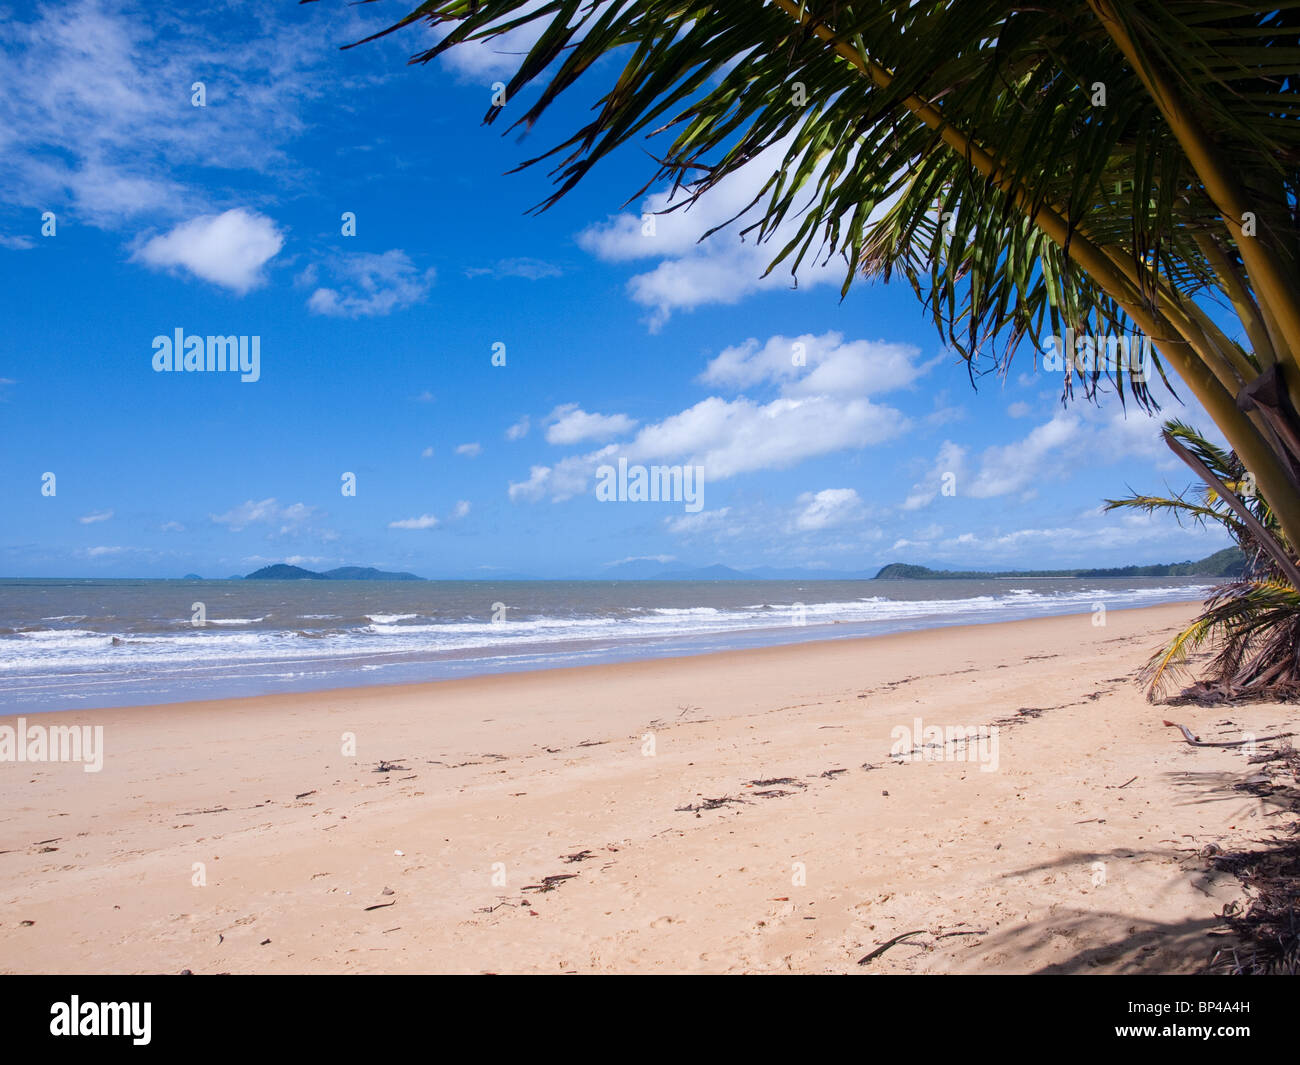 The calm surf at South Mission Beach, Queensland, Australia. Stock Photo